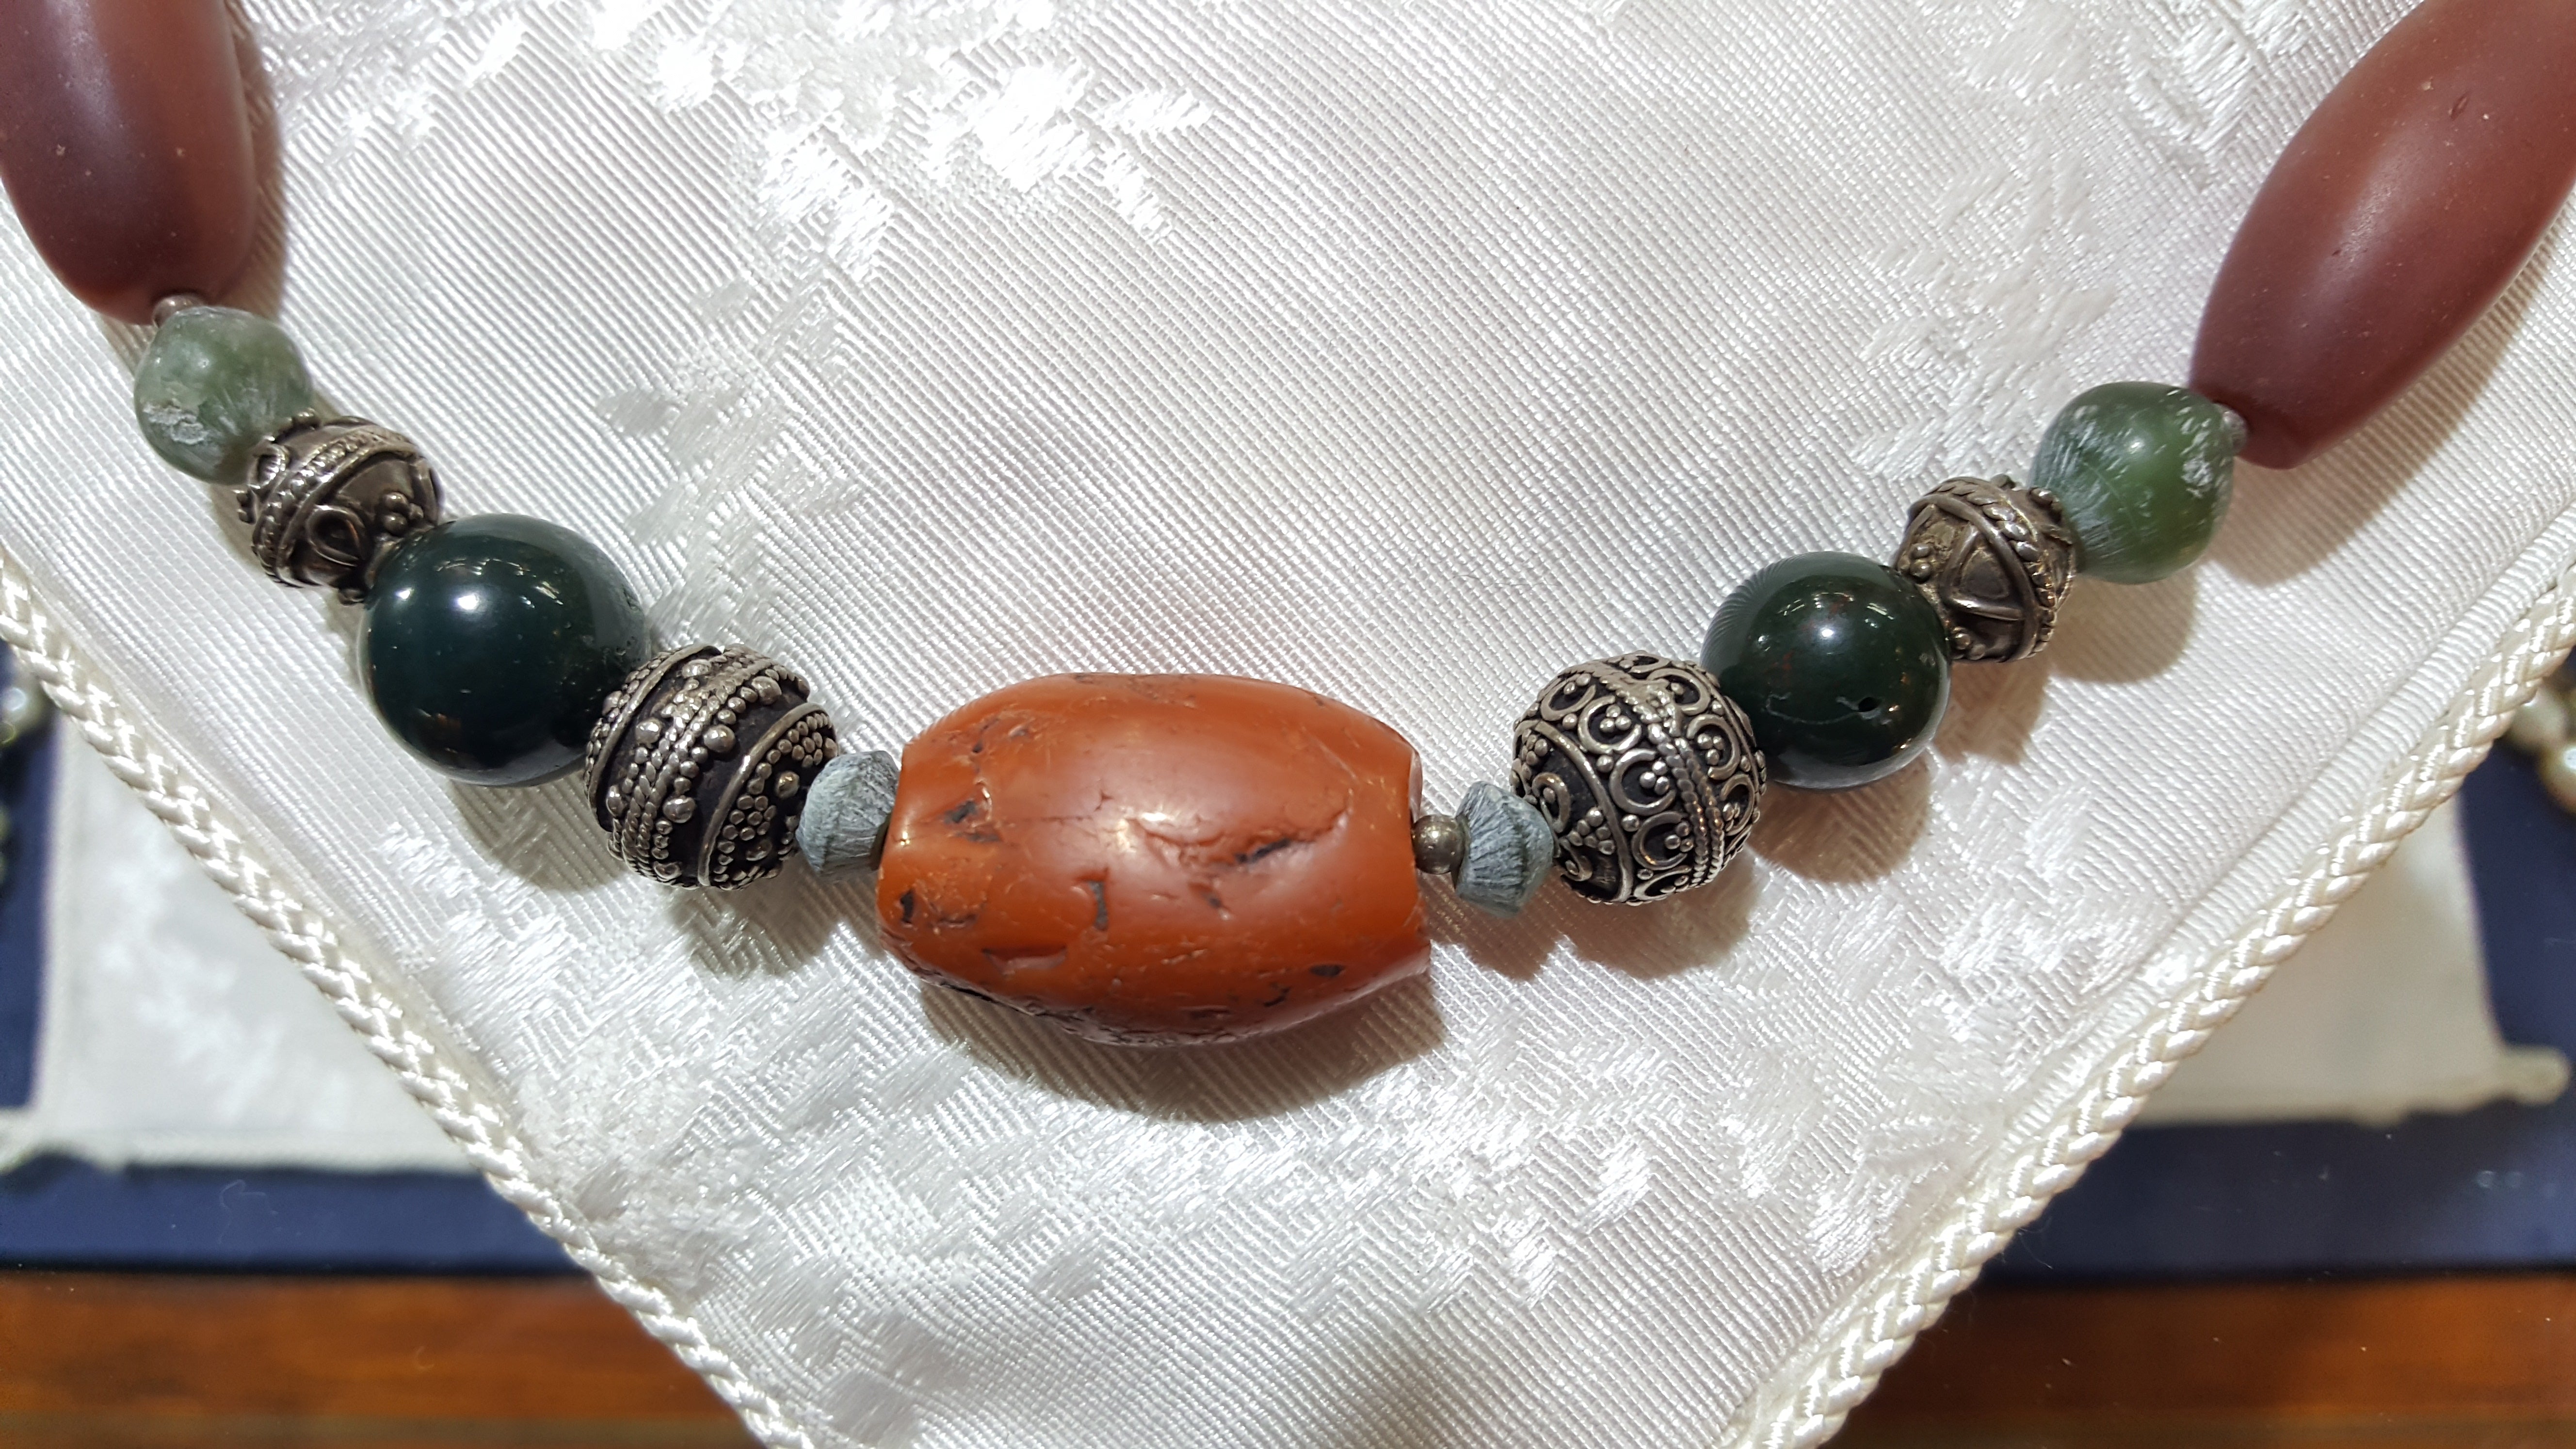 Necklace with old carnelian, green Benzhahr & sterling silver elements